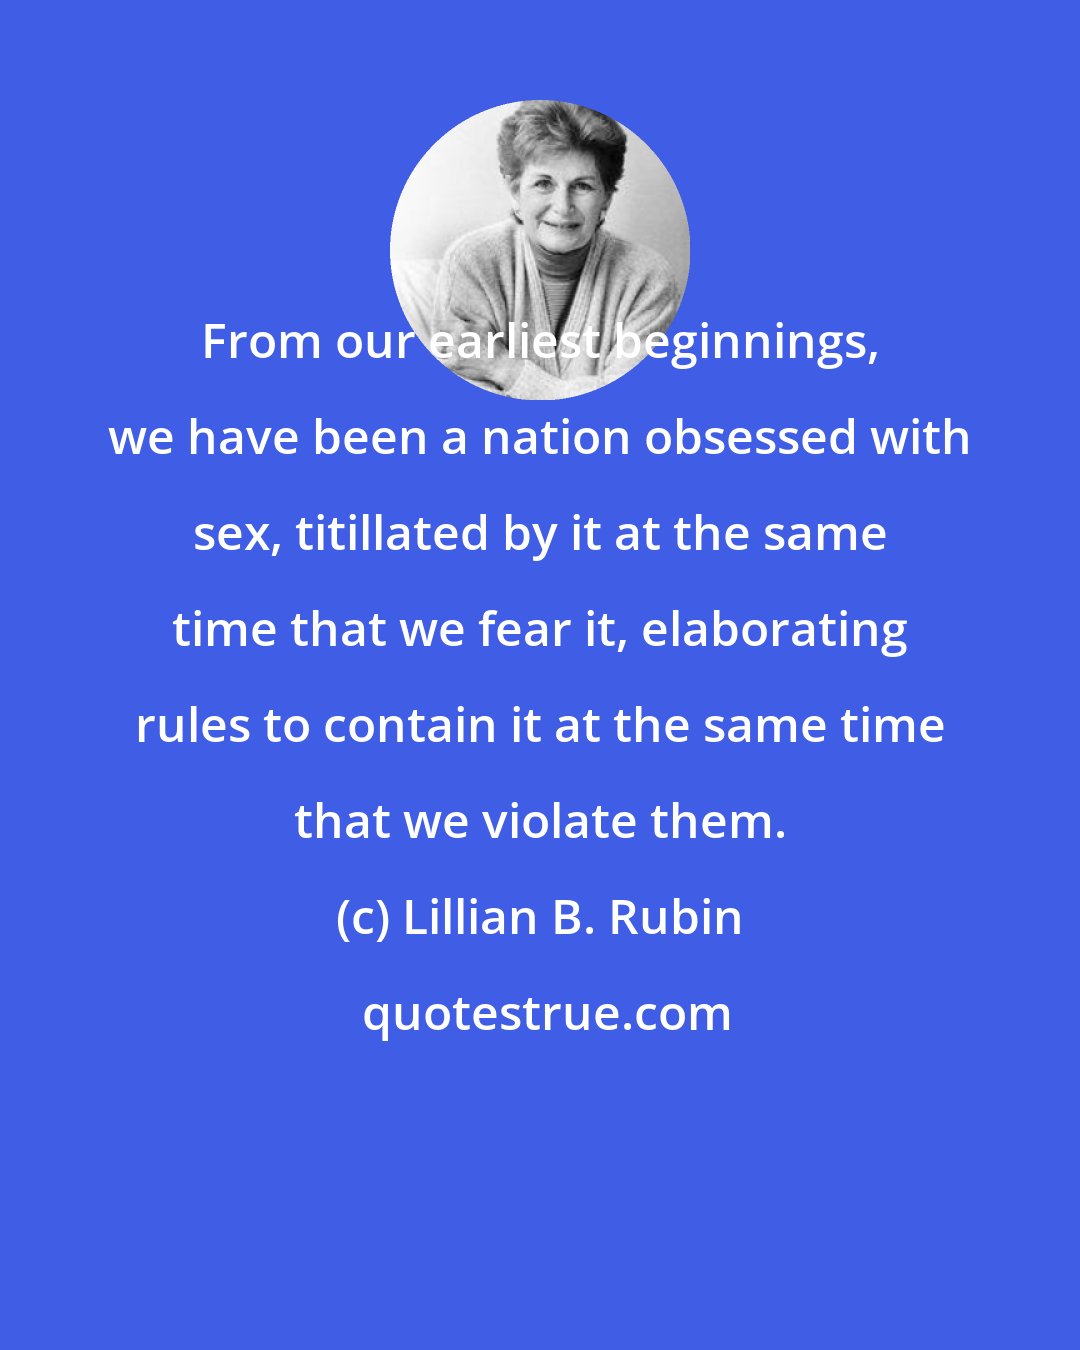 Lillian B. Rubin: From our earliest beginnings, we have been a nation obsessed with sex, titillated by it at the same time that we fear it, elaborating rules to contain it at the same time that we violate them.